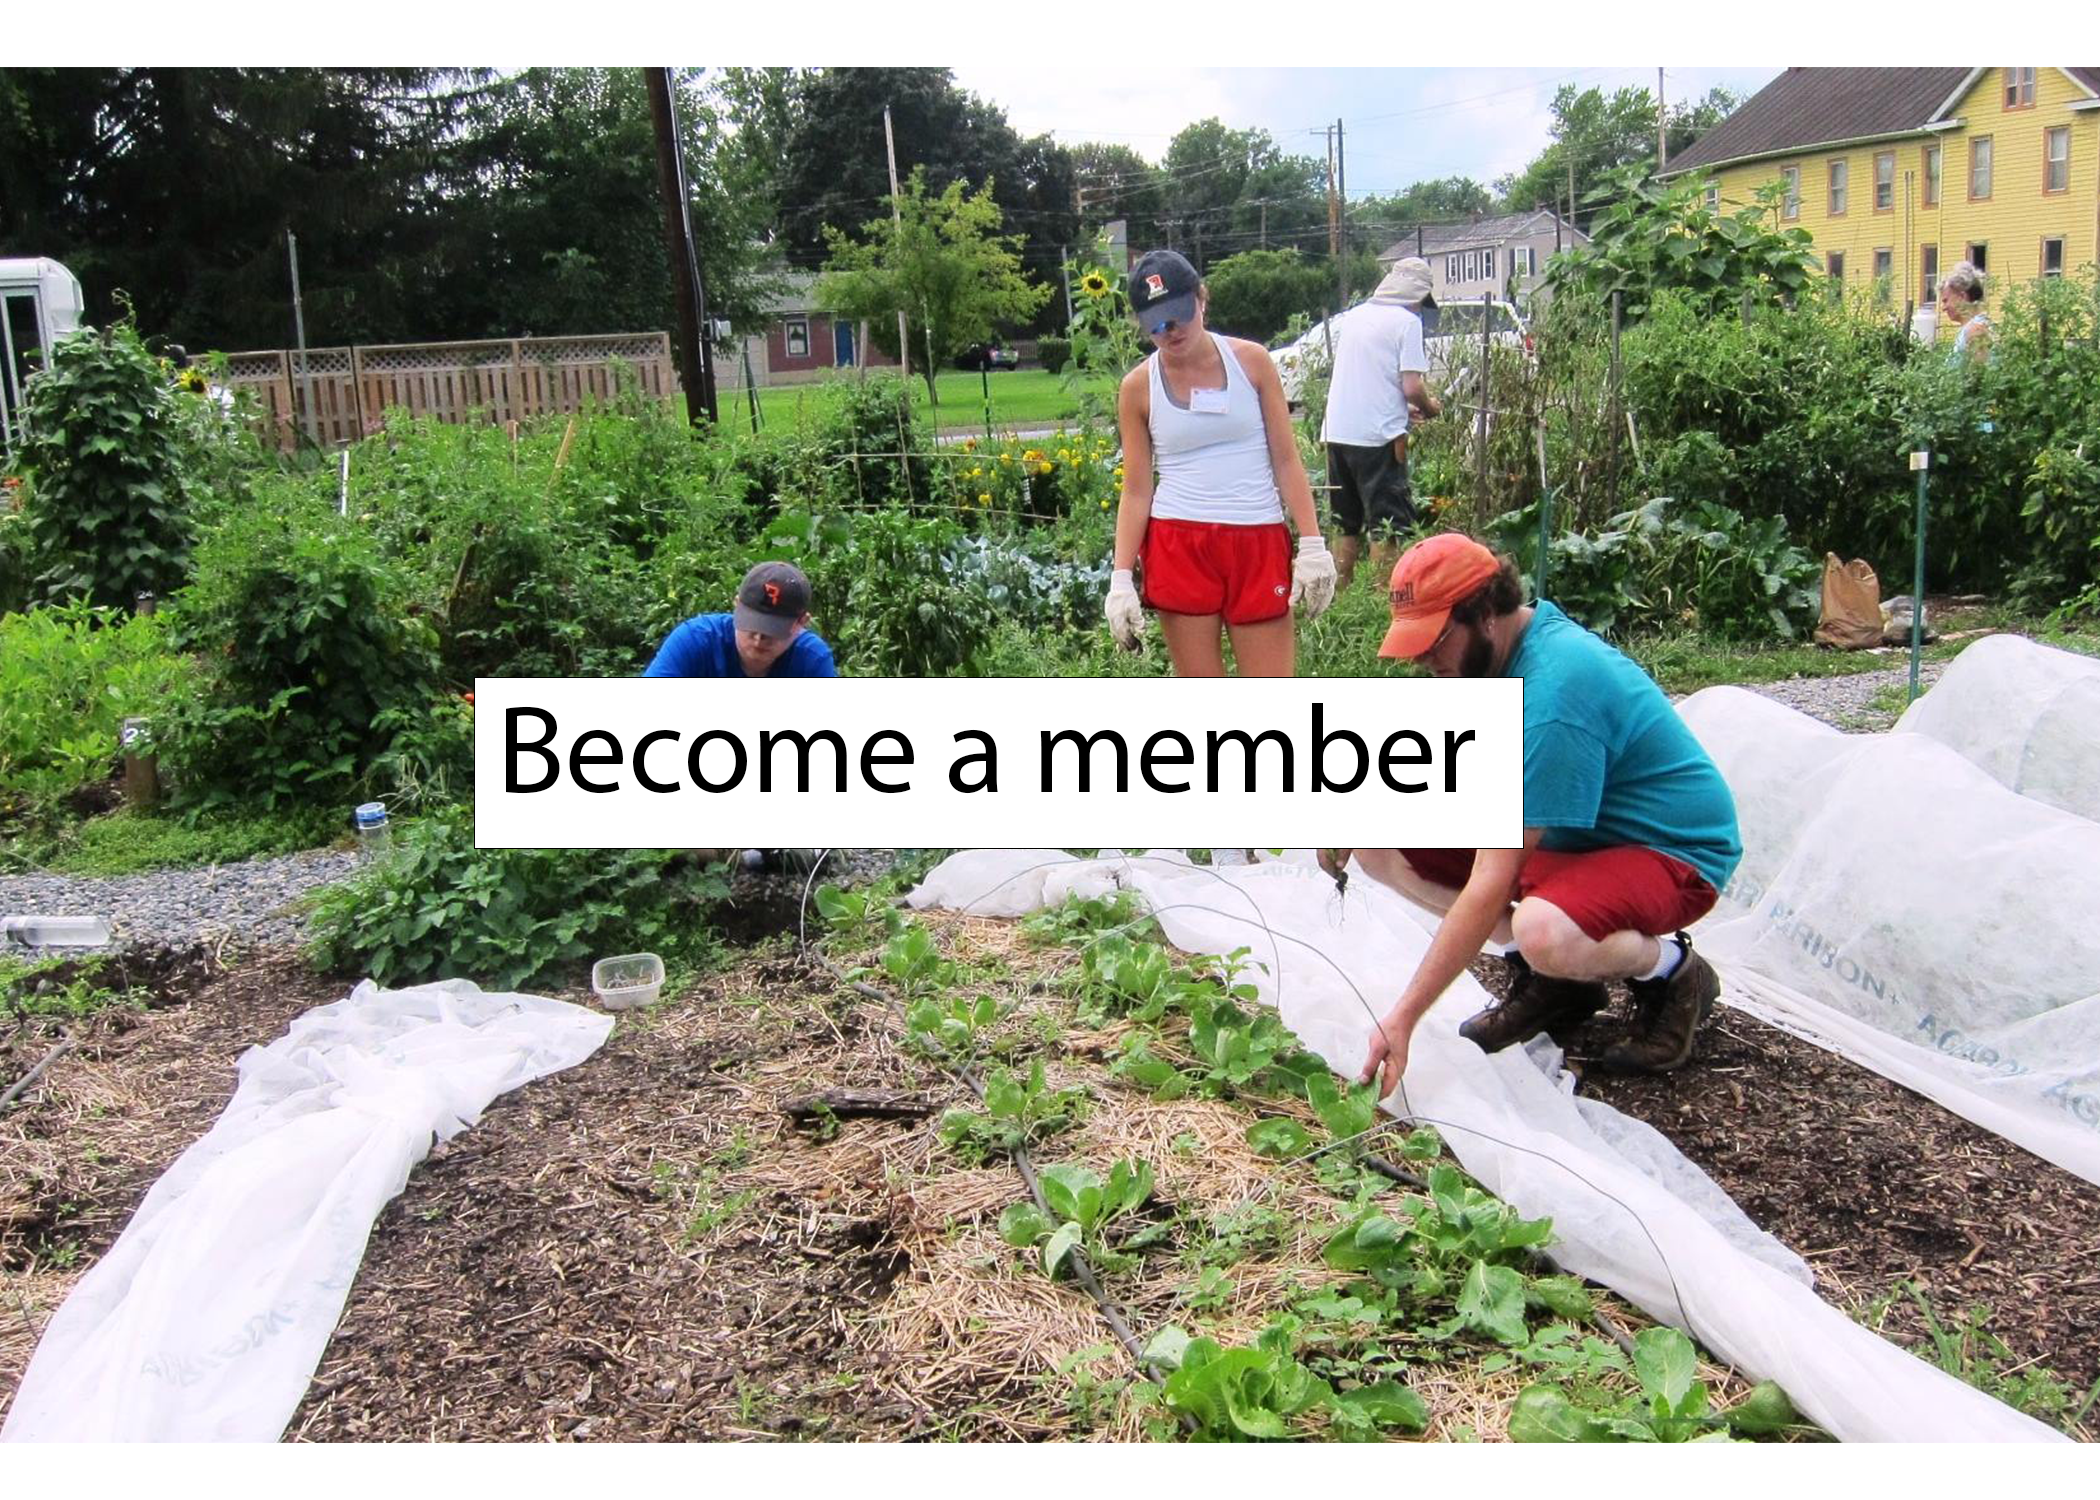 Three people around a plot at work. Labeled "Become a member" 